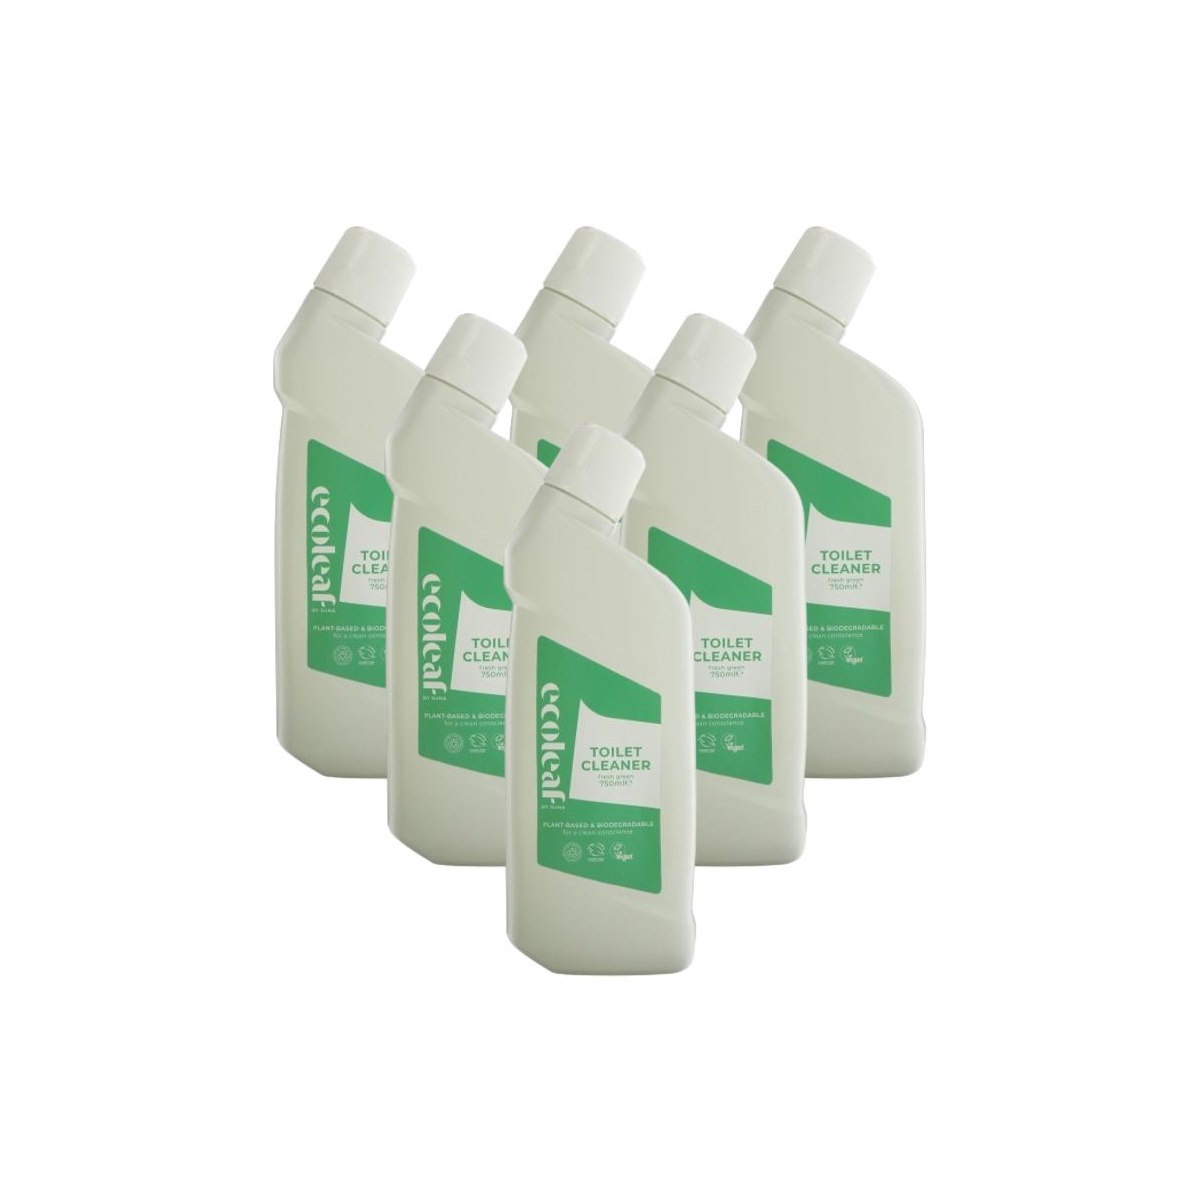 Case of 6 x Ecoleaf By Suma Toilet Cleaner - Fresh Green - 750ml